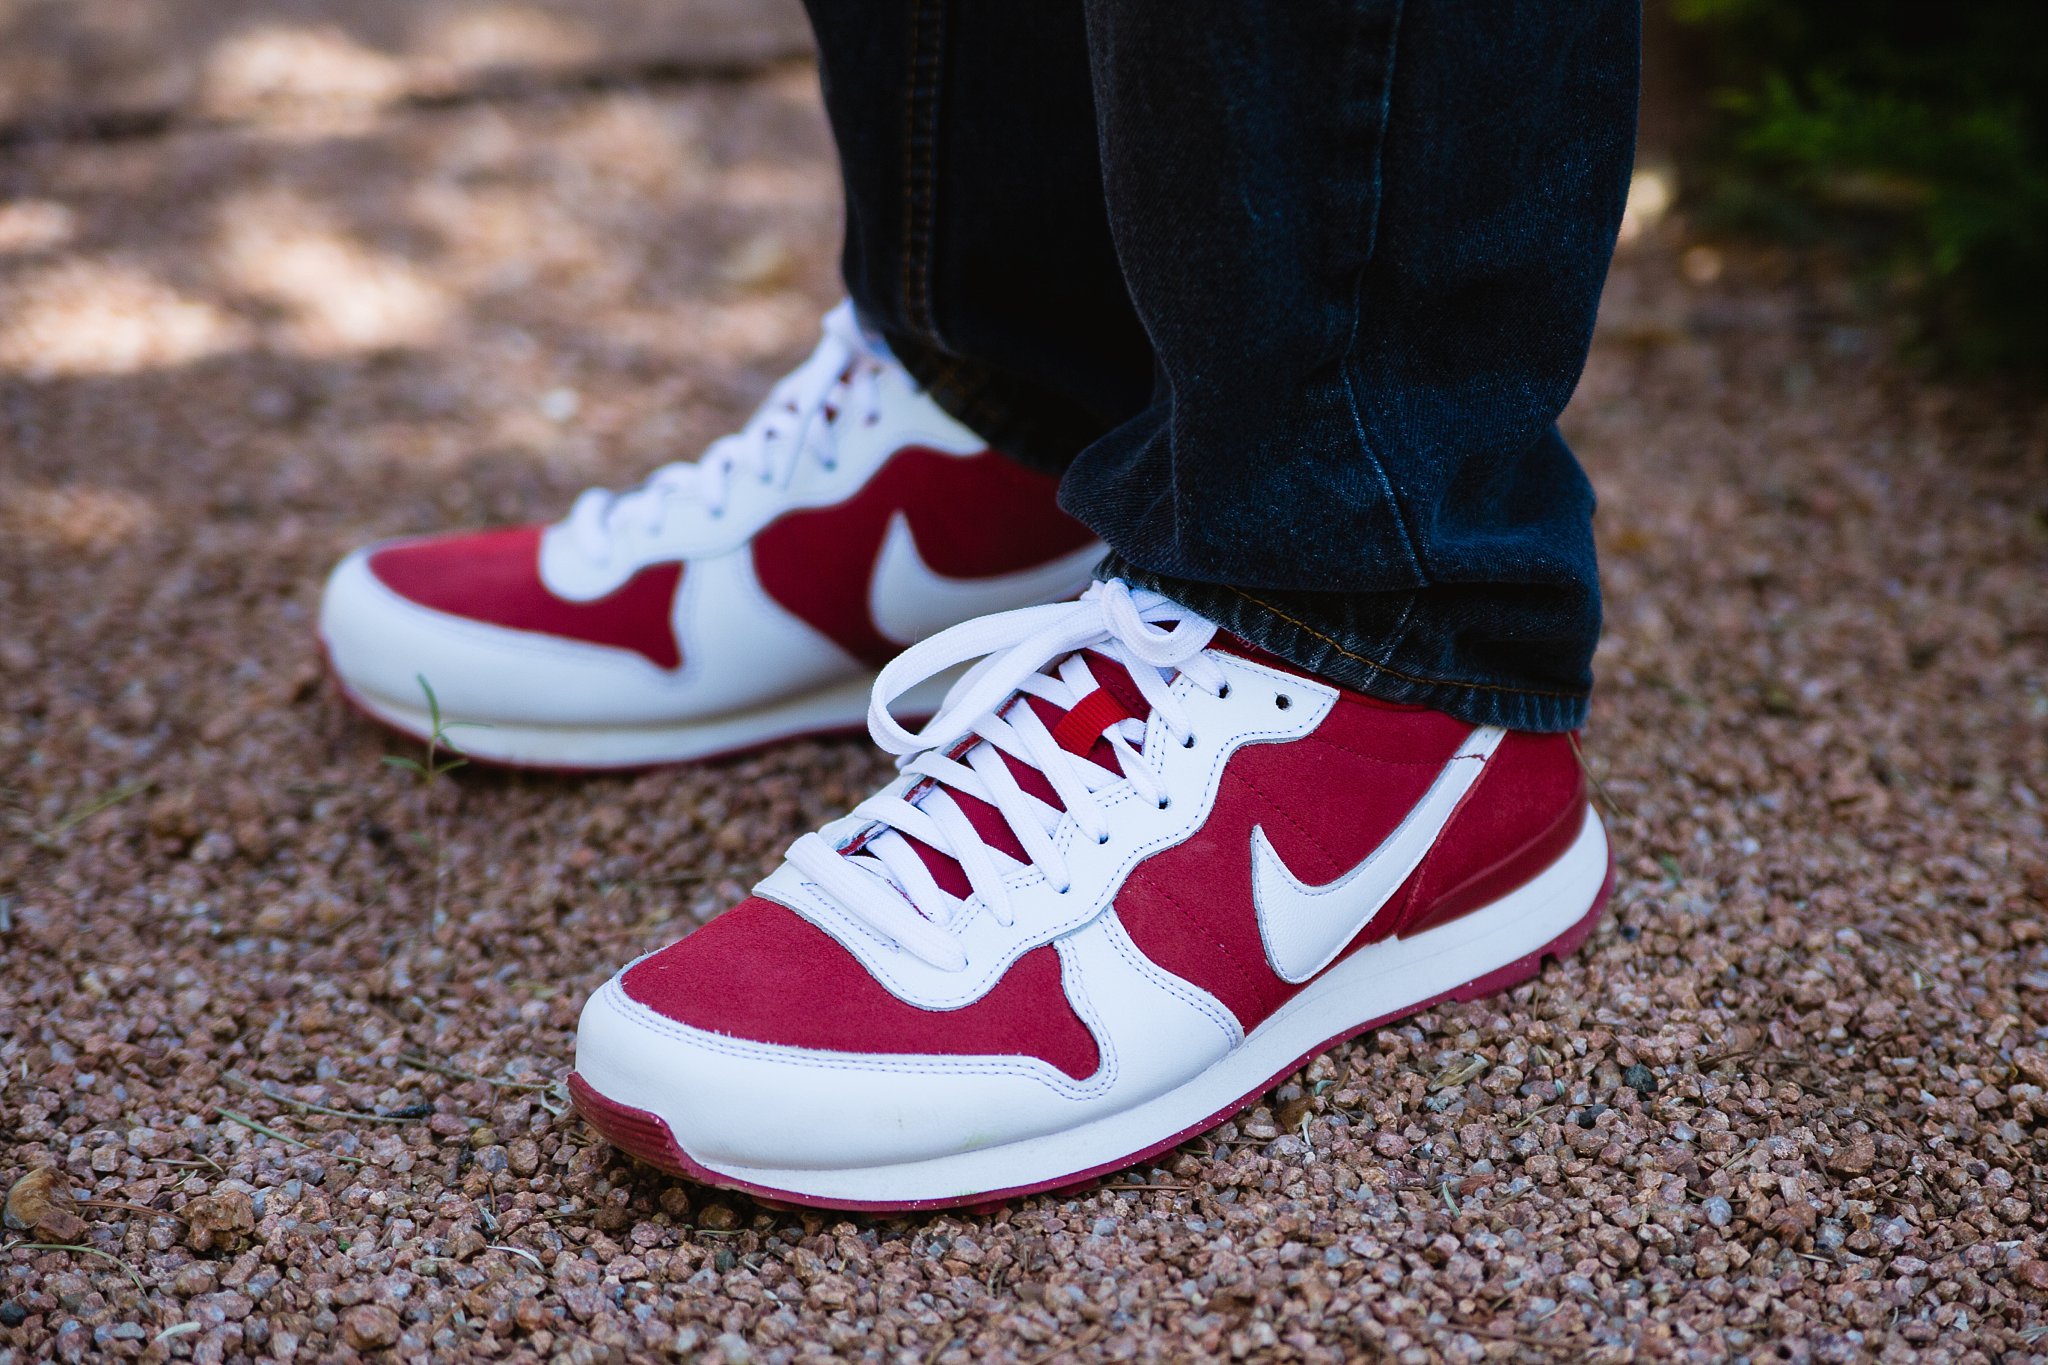 Groom's casual red Nike shoes for his wedding day by Arizona wedding photographers PMA Photography.